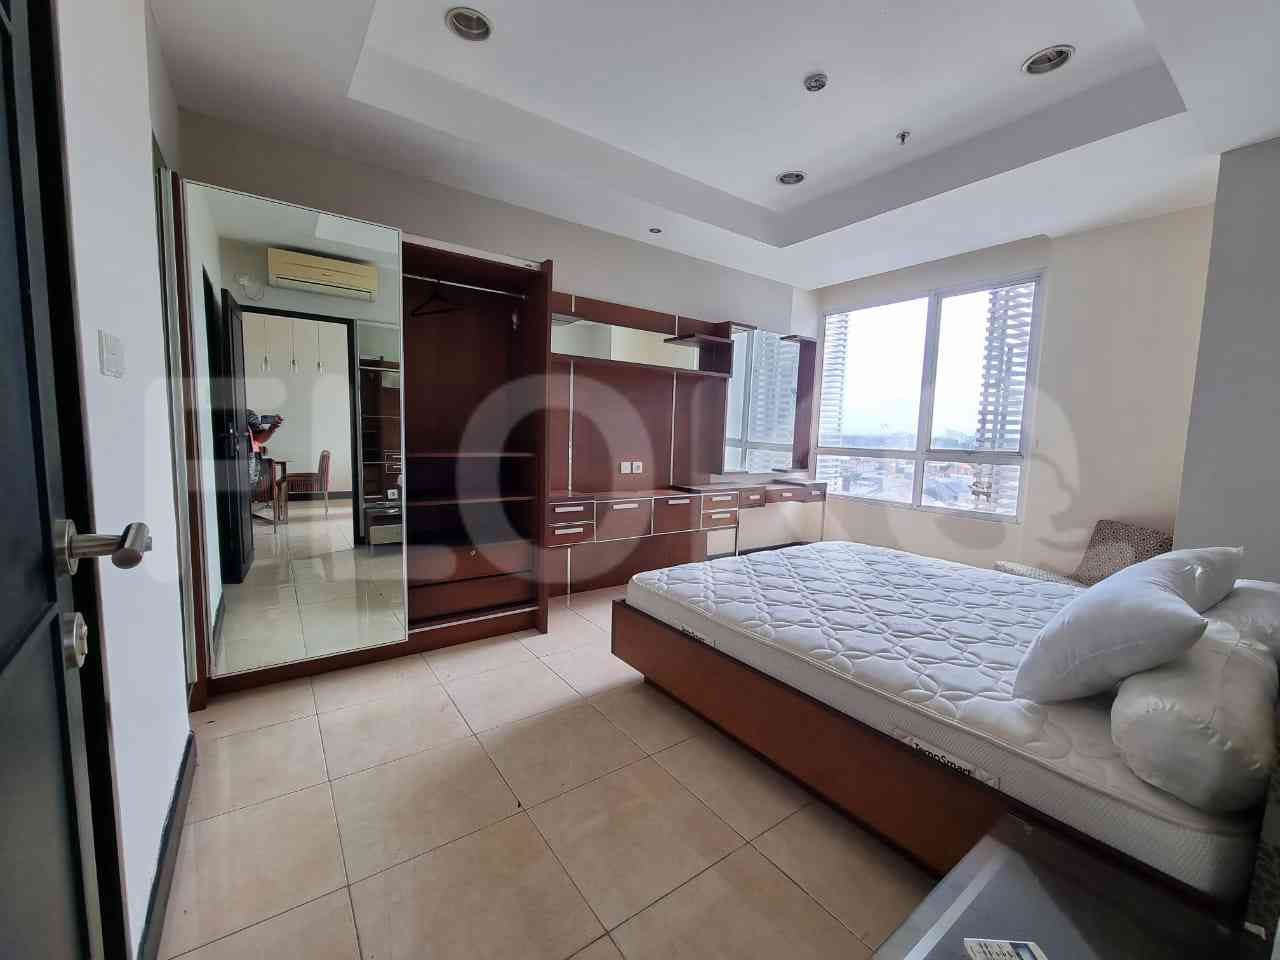 2 Bedroom on 6th Floor for Rent in Essence Darmawangsa Apartment - fci940 2